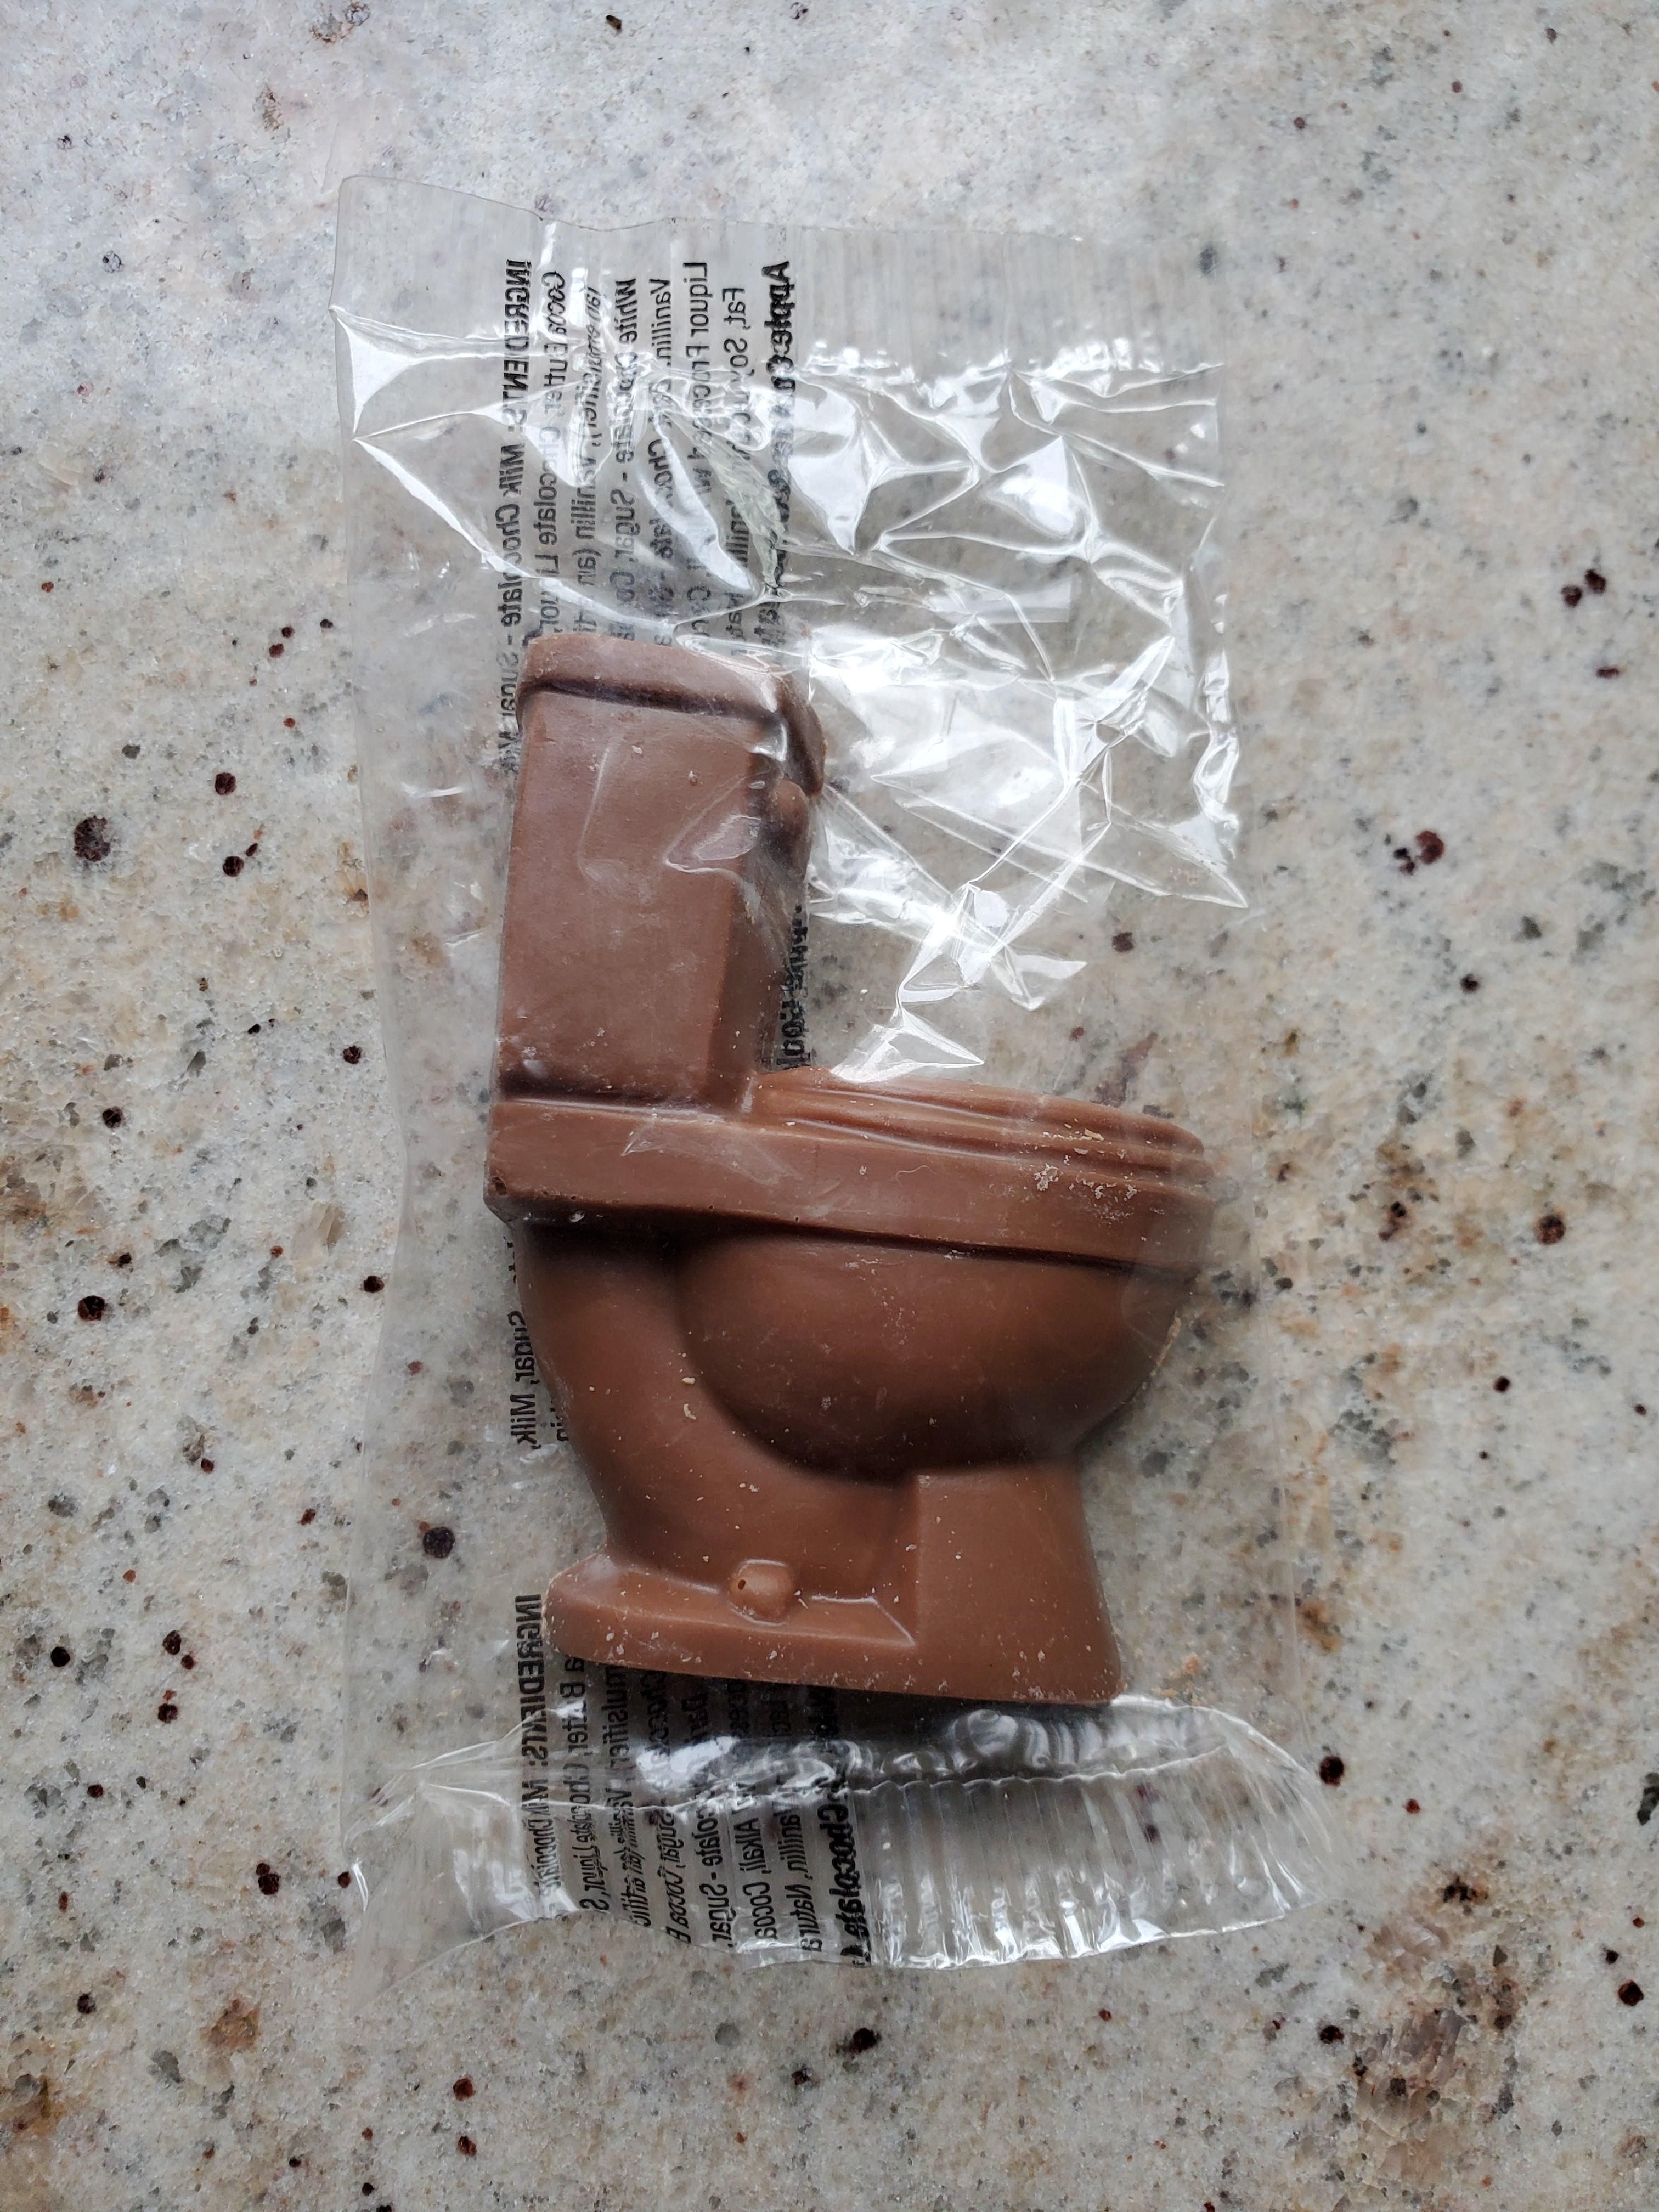 My husband is a plumber and his company sent chocolate toilets..